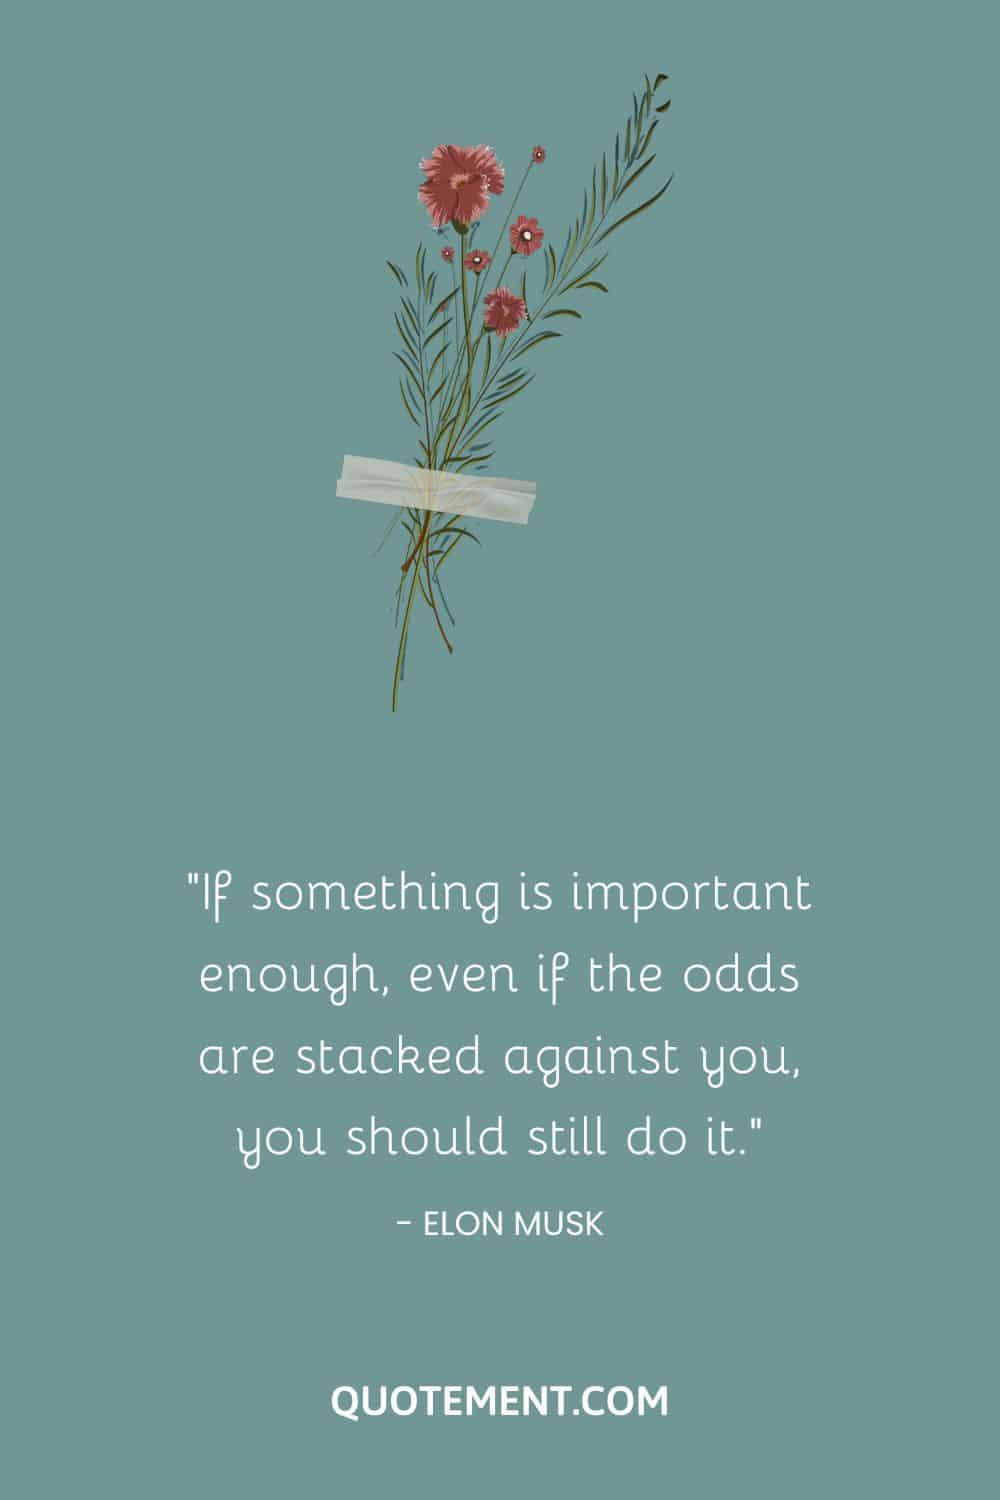 If something is important enough, even if the odds are stacked against you, you should still do it